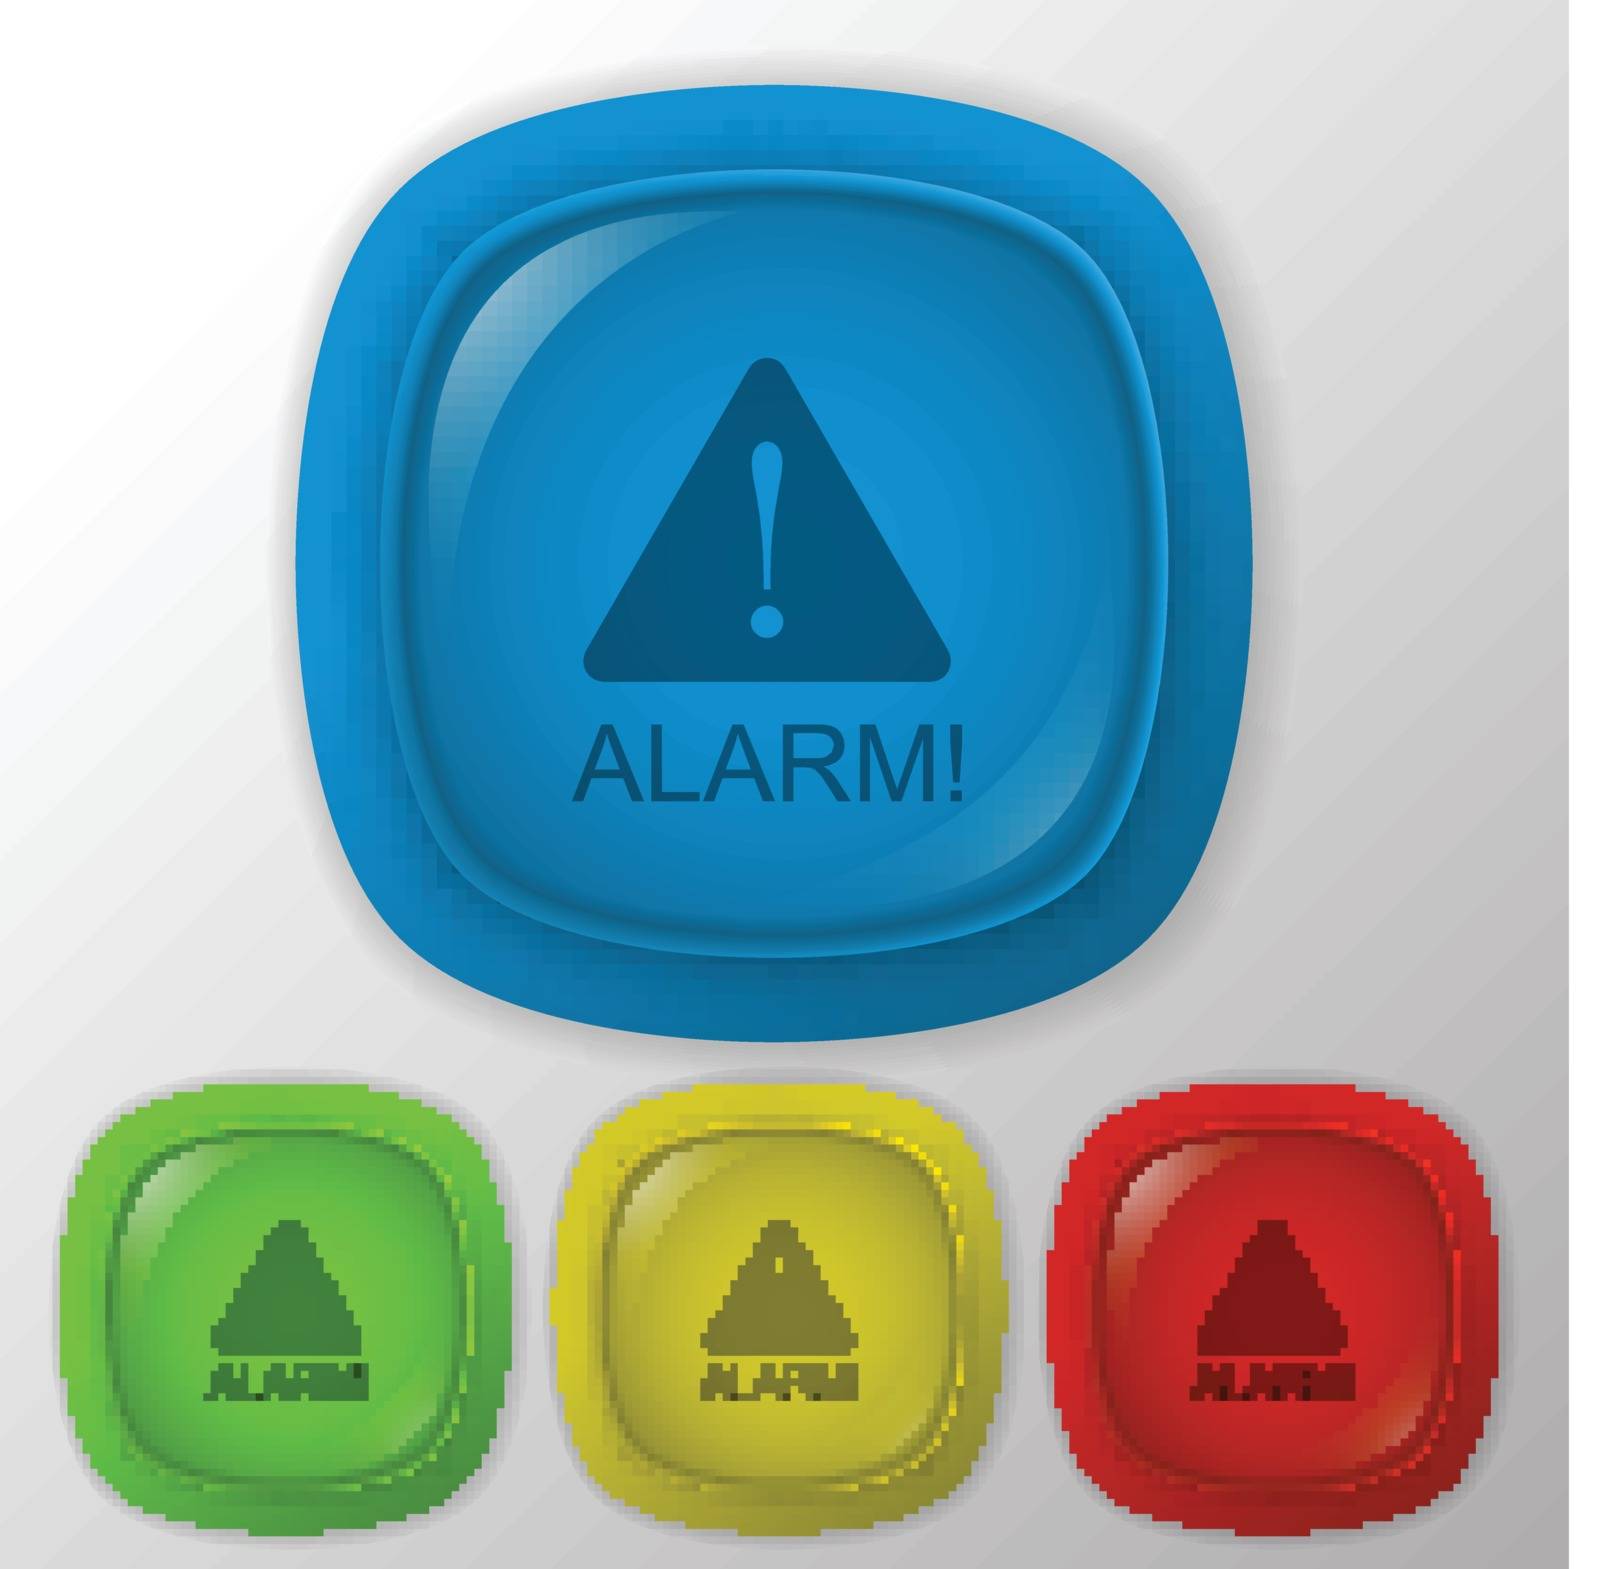 Exclamation Sign, alarm sign.